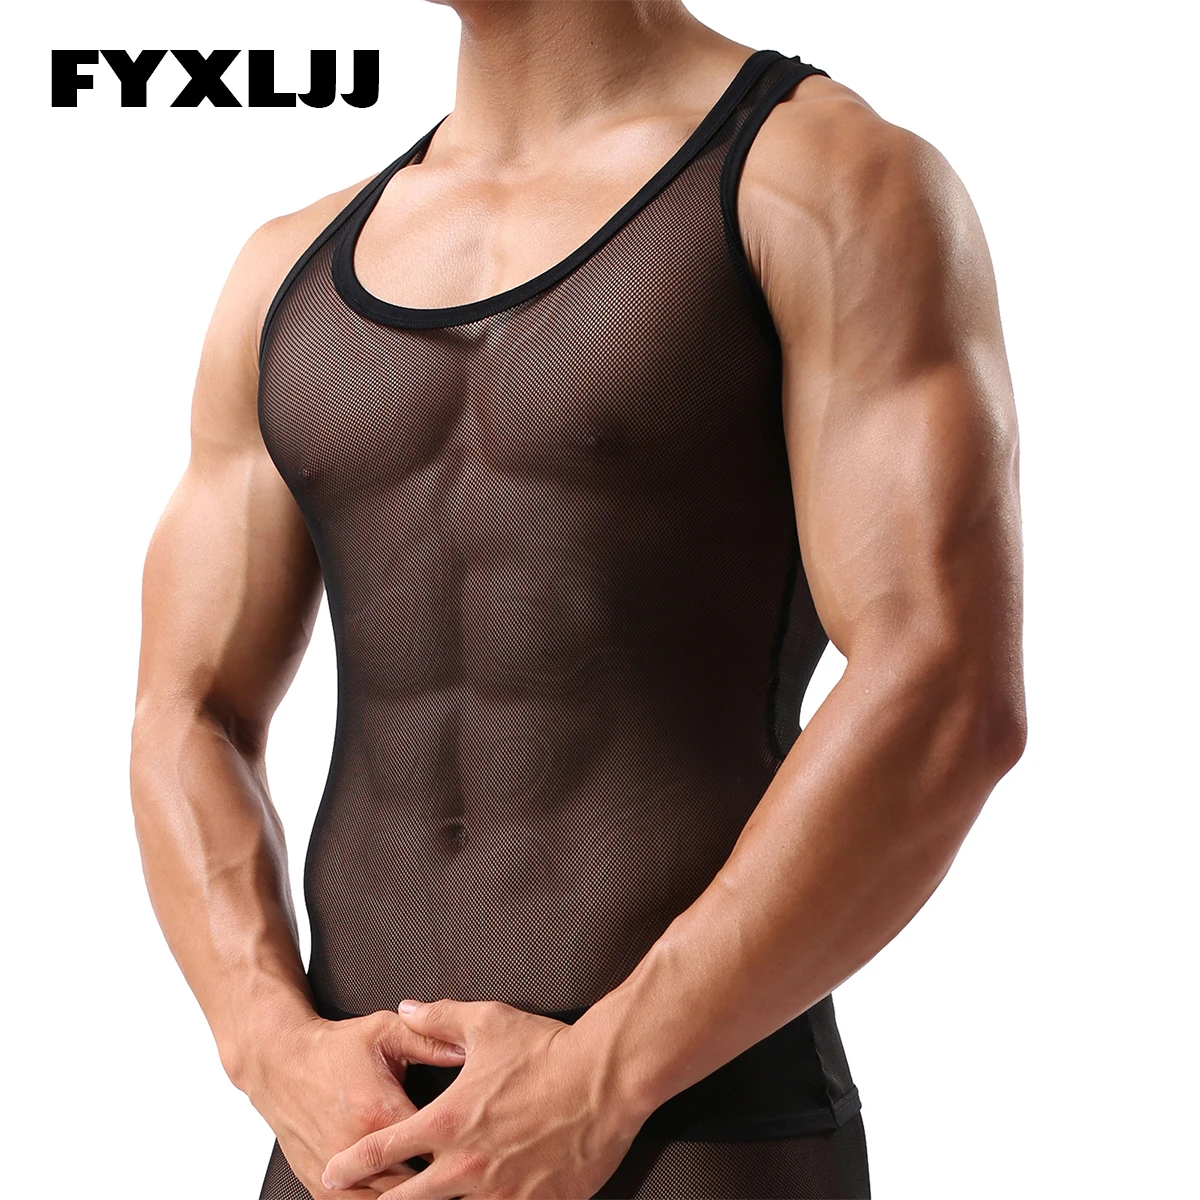 

FYXLJJ See Through Mens Mesh Tanks Top Sexy Fishnet Sleeveless Tank Top Male Perspective Transparent Muscle Top Bodybuilding Tee